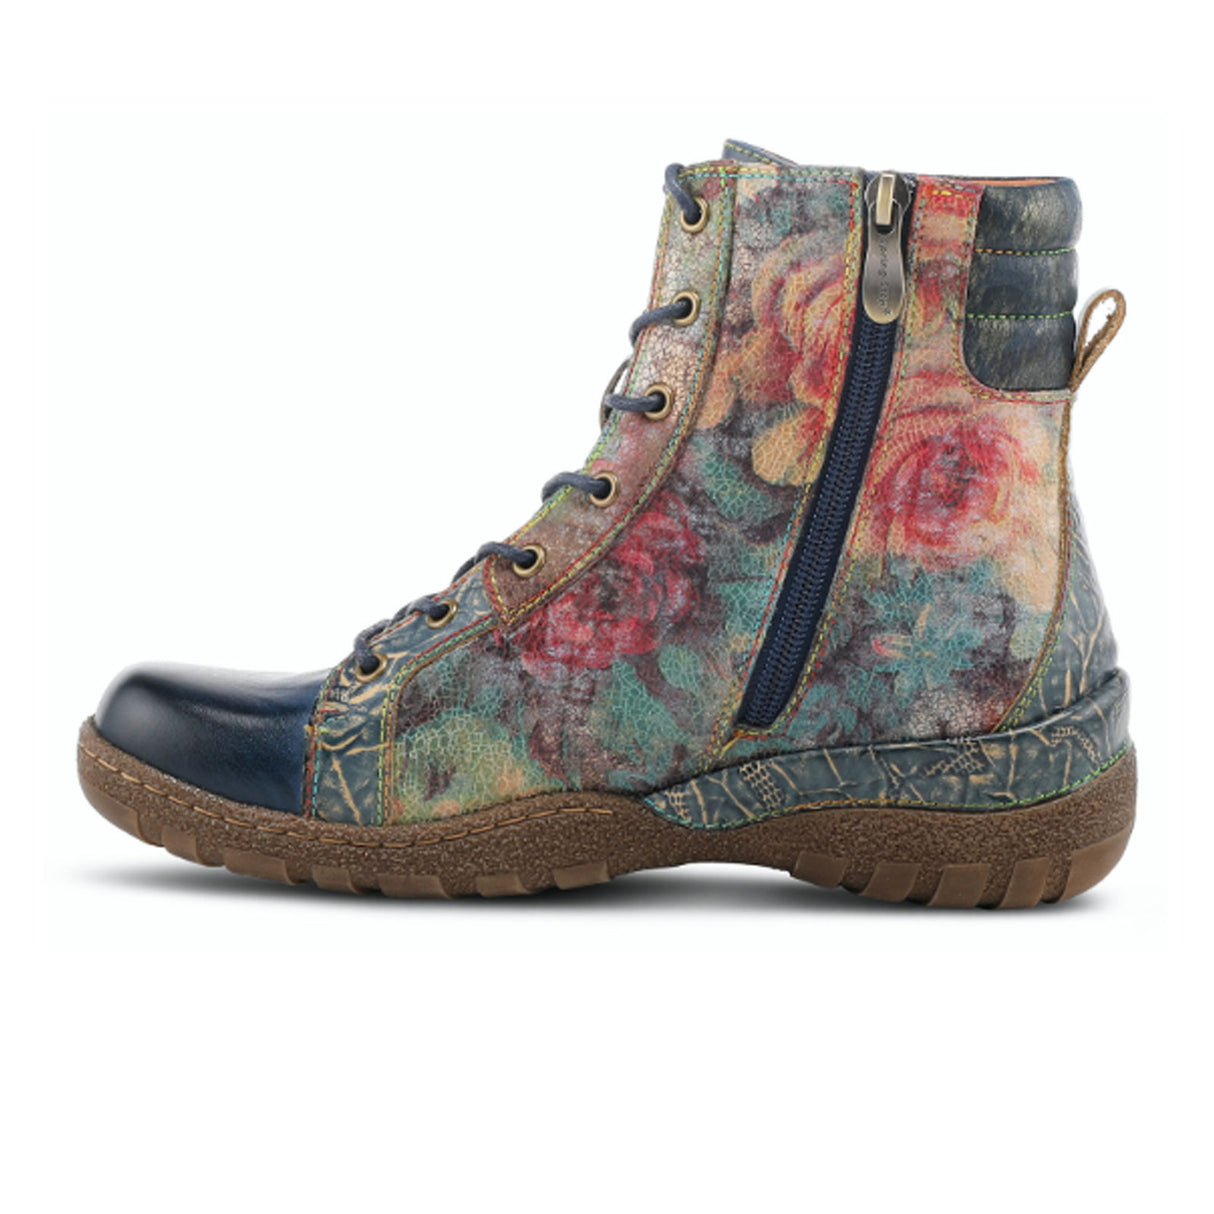 L'Artiste Jadeite Ankle Boot (Women) - Navy Multi Boots - Fashion - The Heel Shoe Fitters